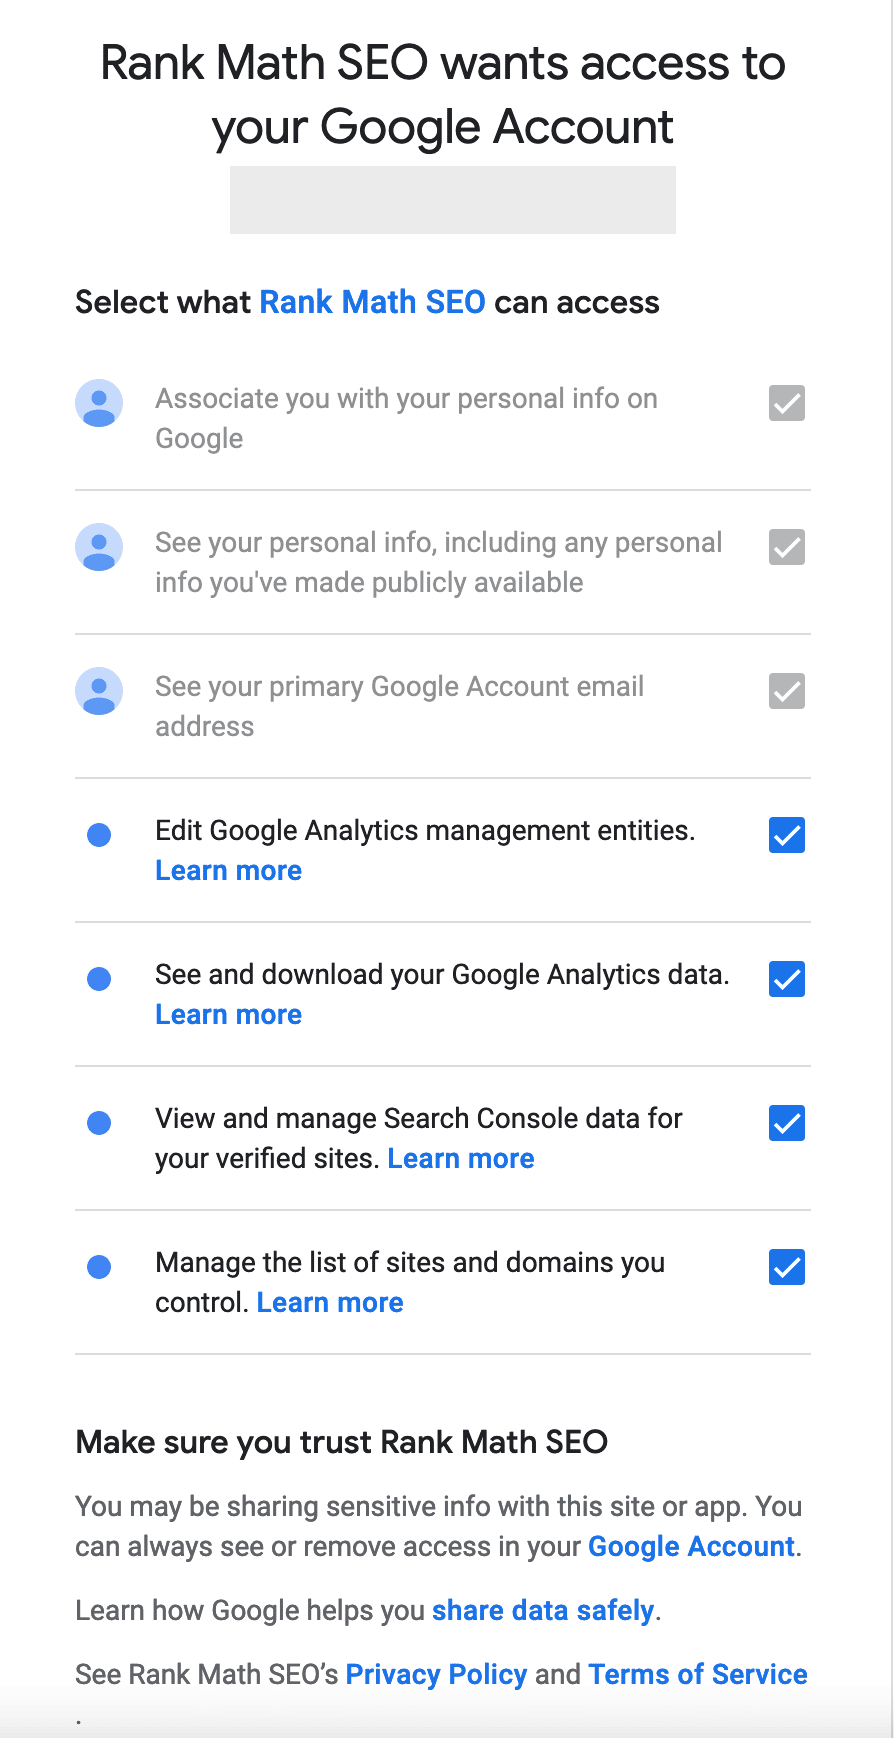 Authorizing access to the Google Search Console.